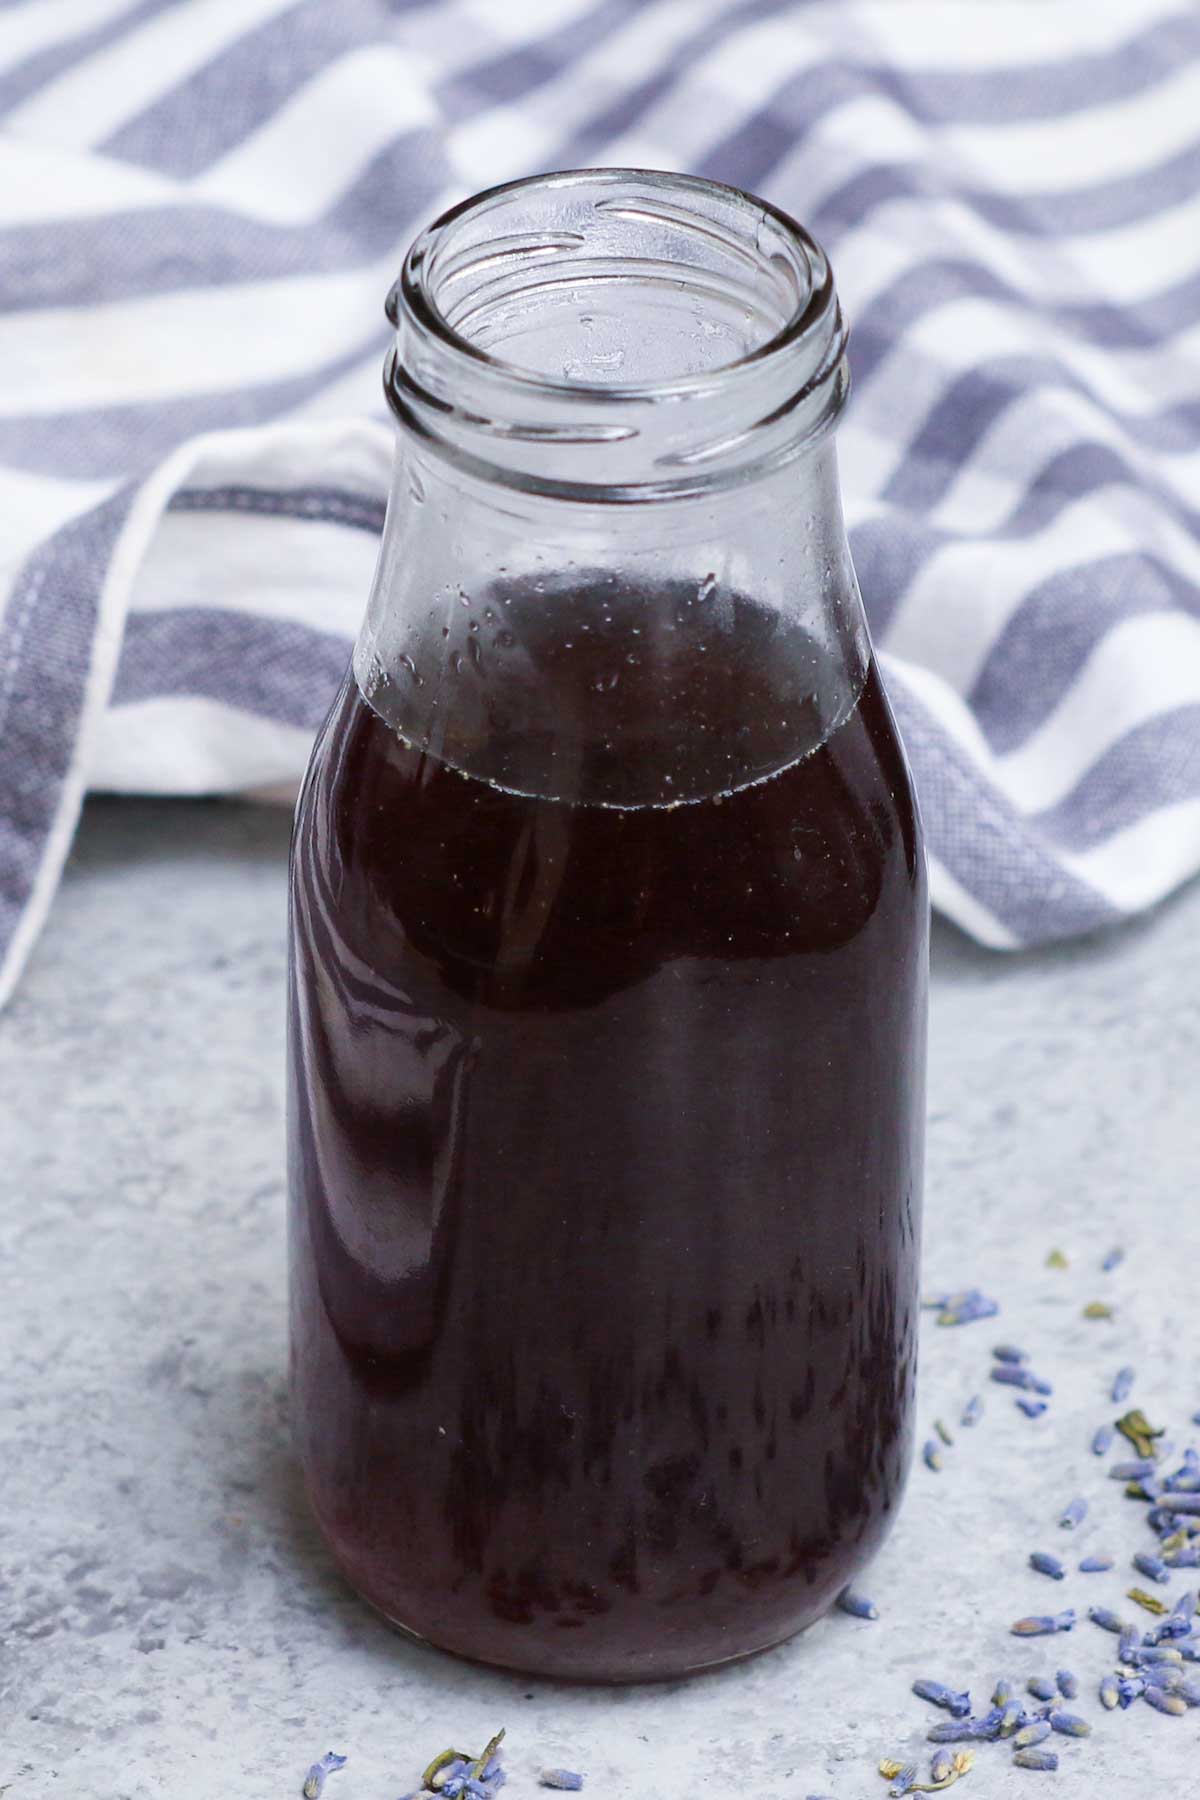 Lavender Simple Syrup is a great way to add sweetness to your drinks while bringing in bright, floral notes. The name itself says how easy this lavender syrup recipe is to make. All you need is lavender, sweetener and water to make an herb-infused syrup that can transform your cocktails, or add elegance to classic beverages like coffee, tea or lemonade.